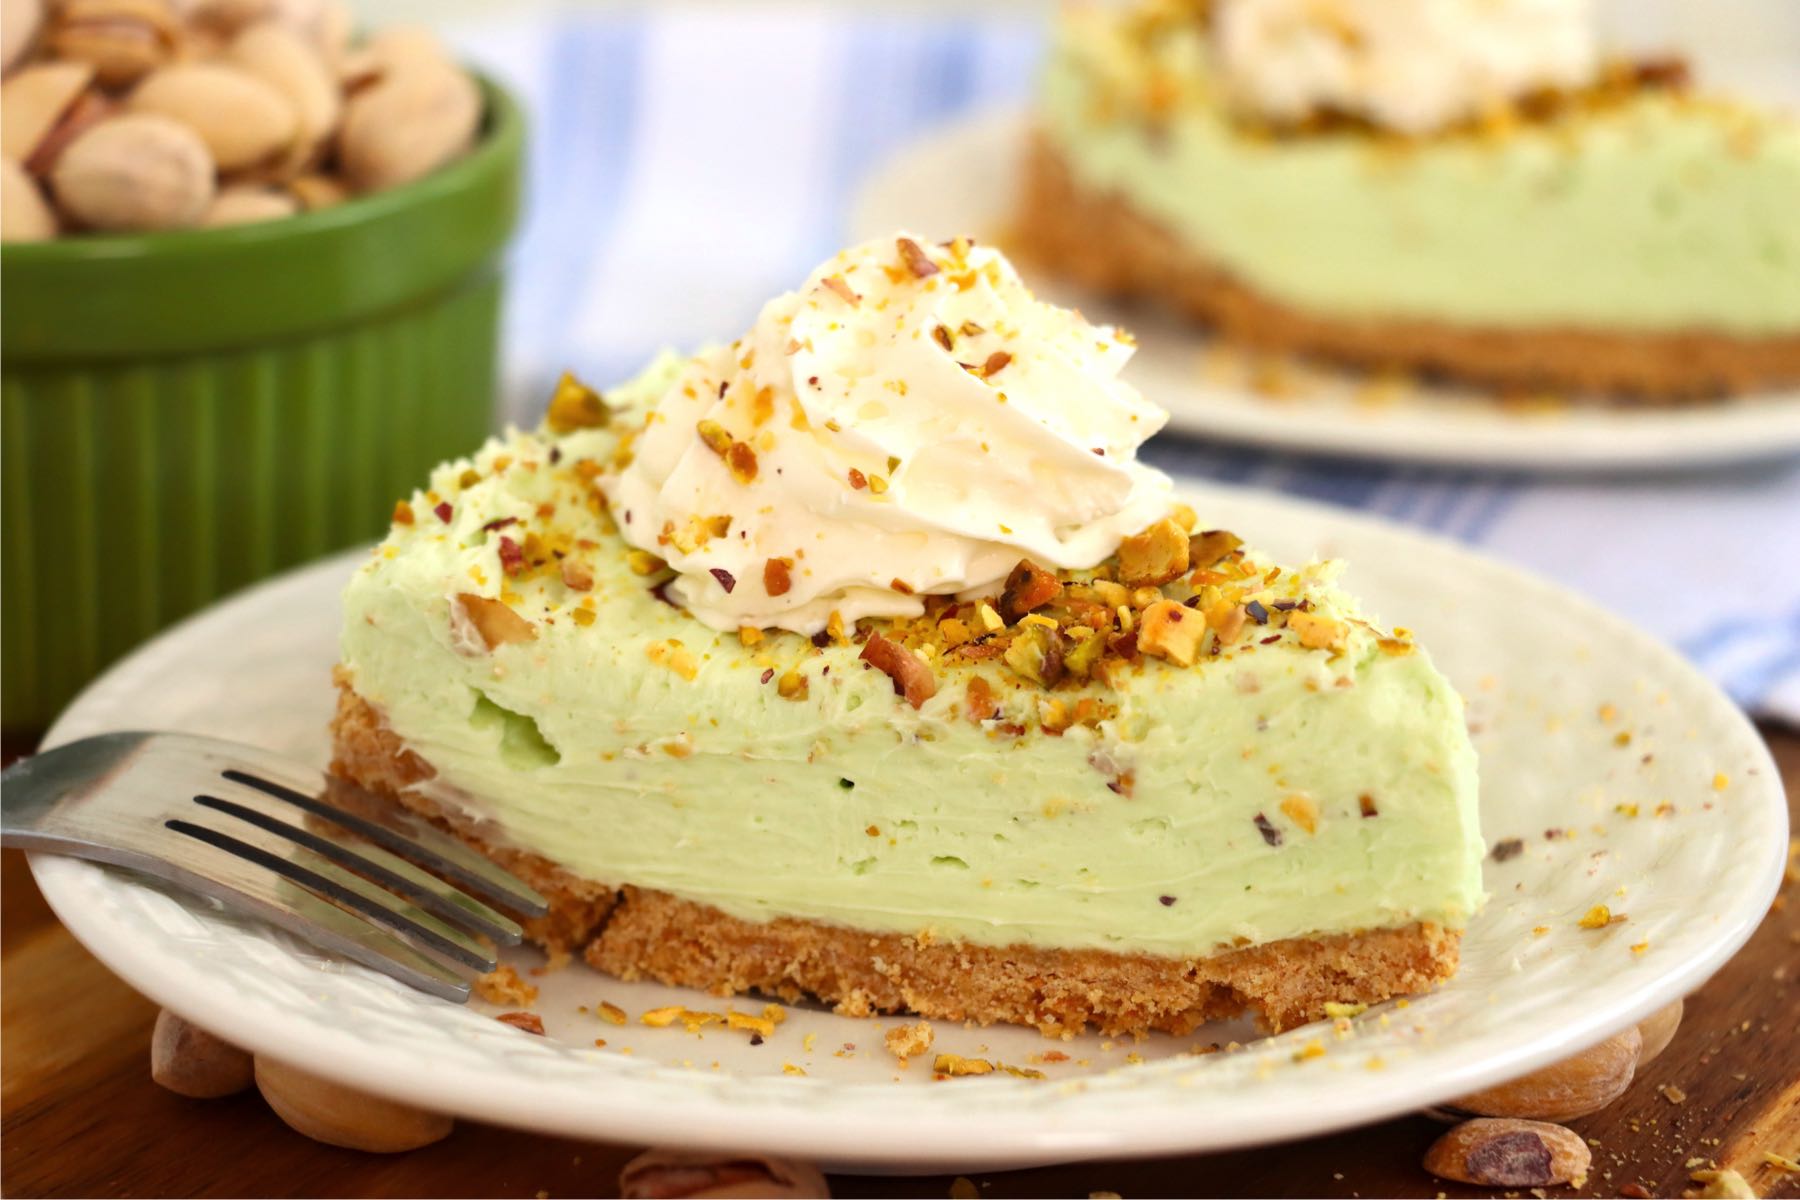 Piece of pistachio cheesecake on a white plate